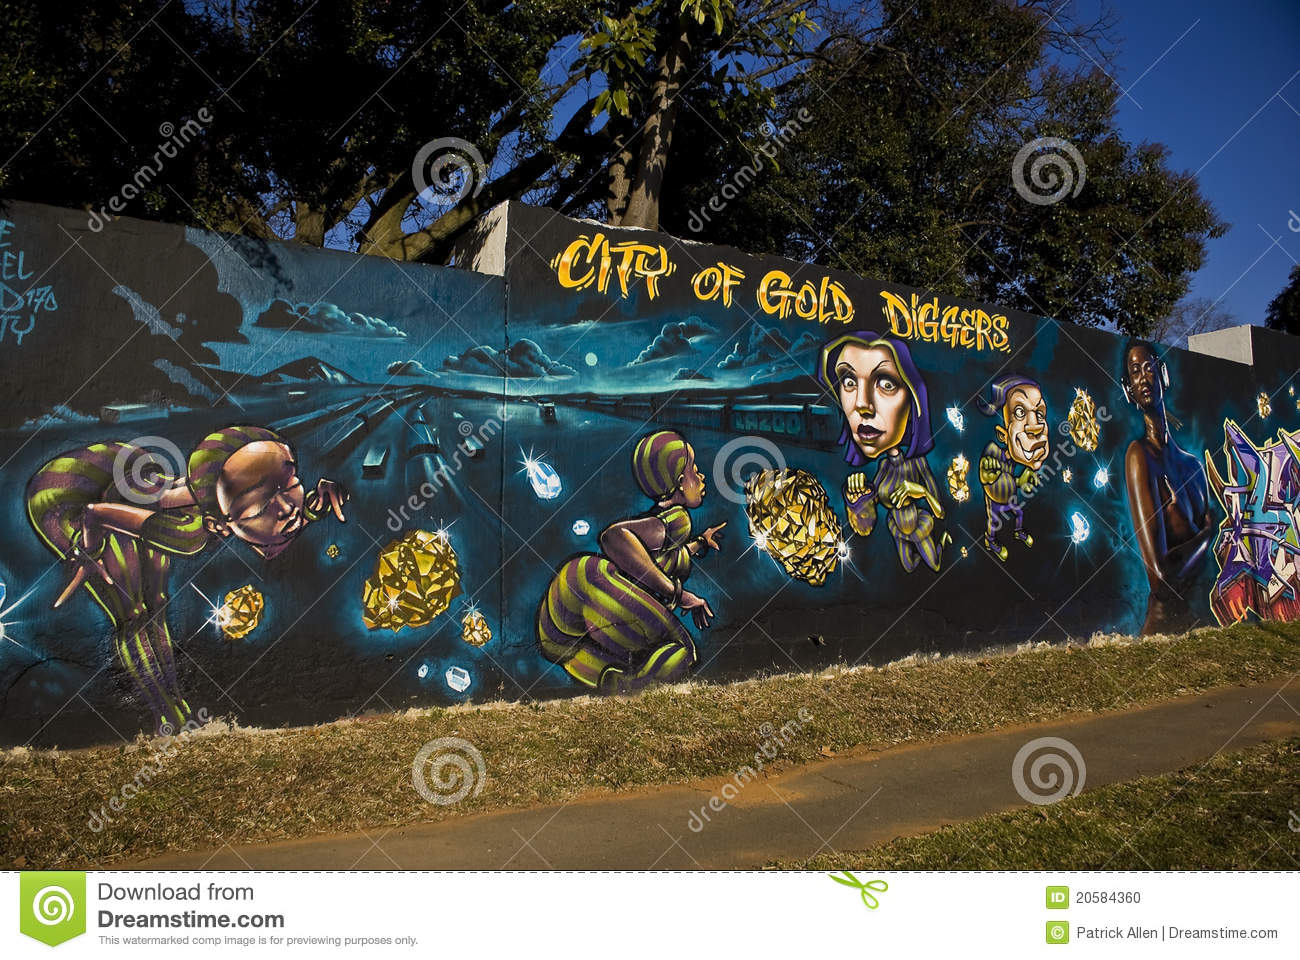 Graffiti Friday Is Inspired By Images From The City Of Gold Urban Art